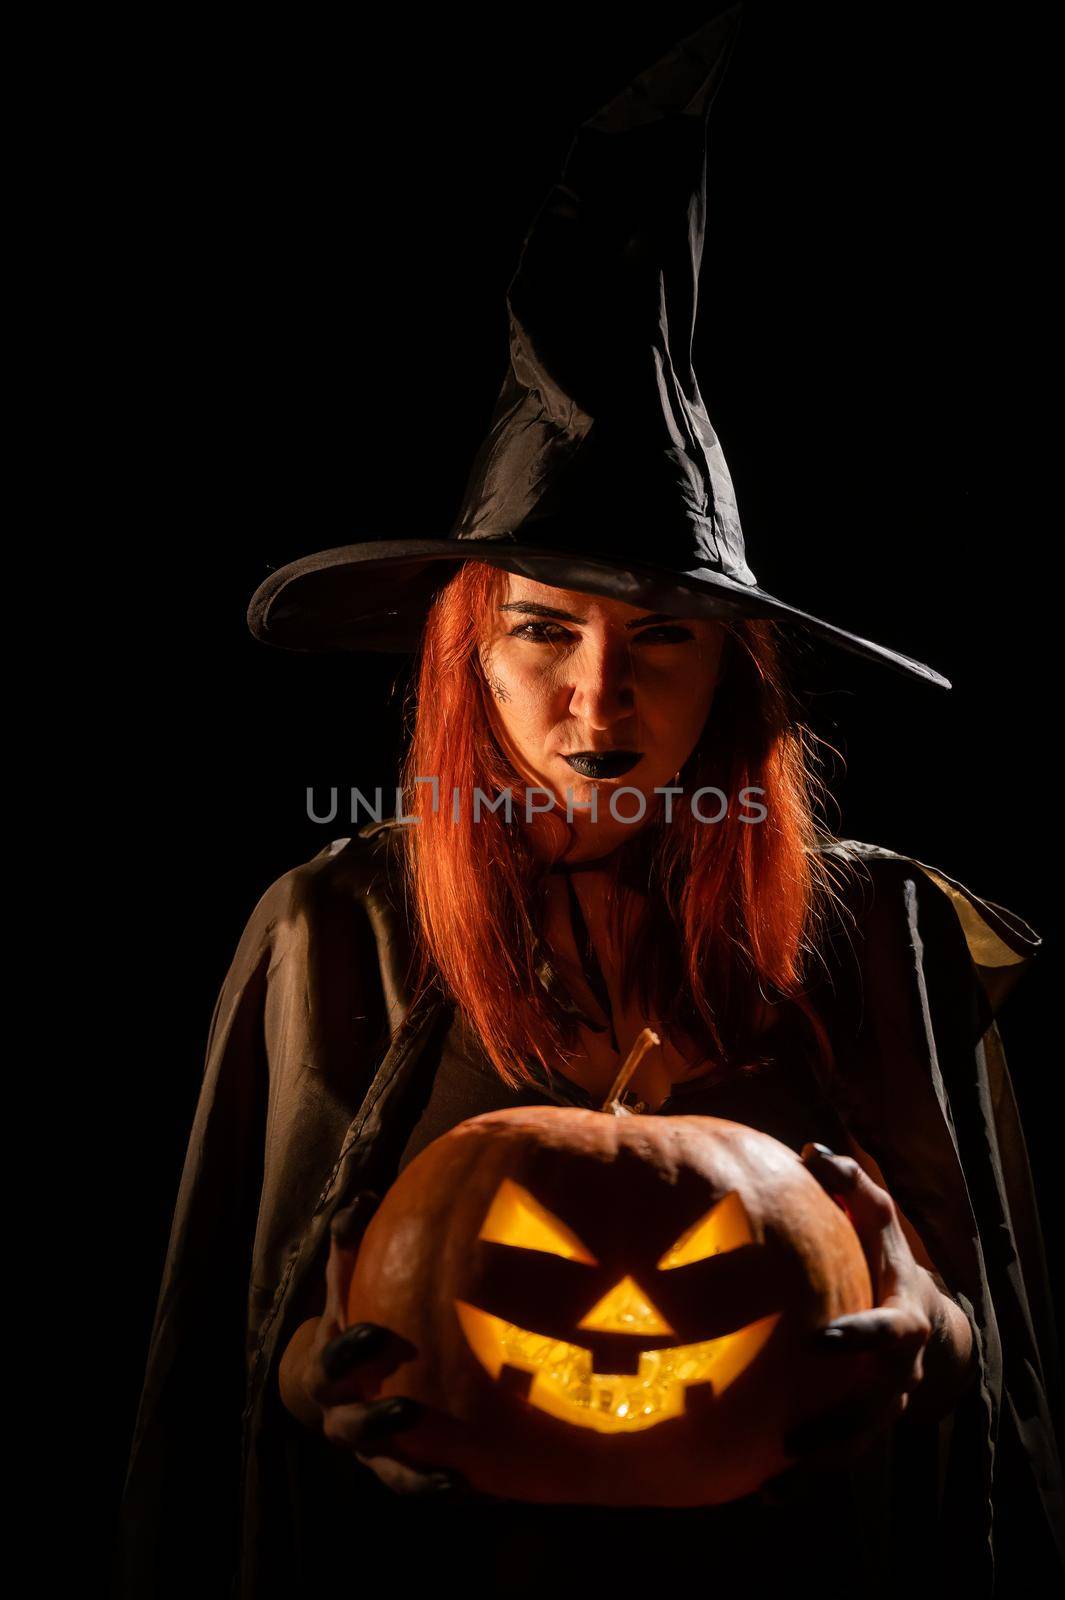 Wicked witch holding a jack-o-lantern for halloween by mrwed54